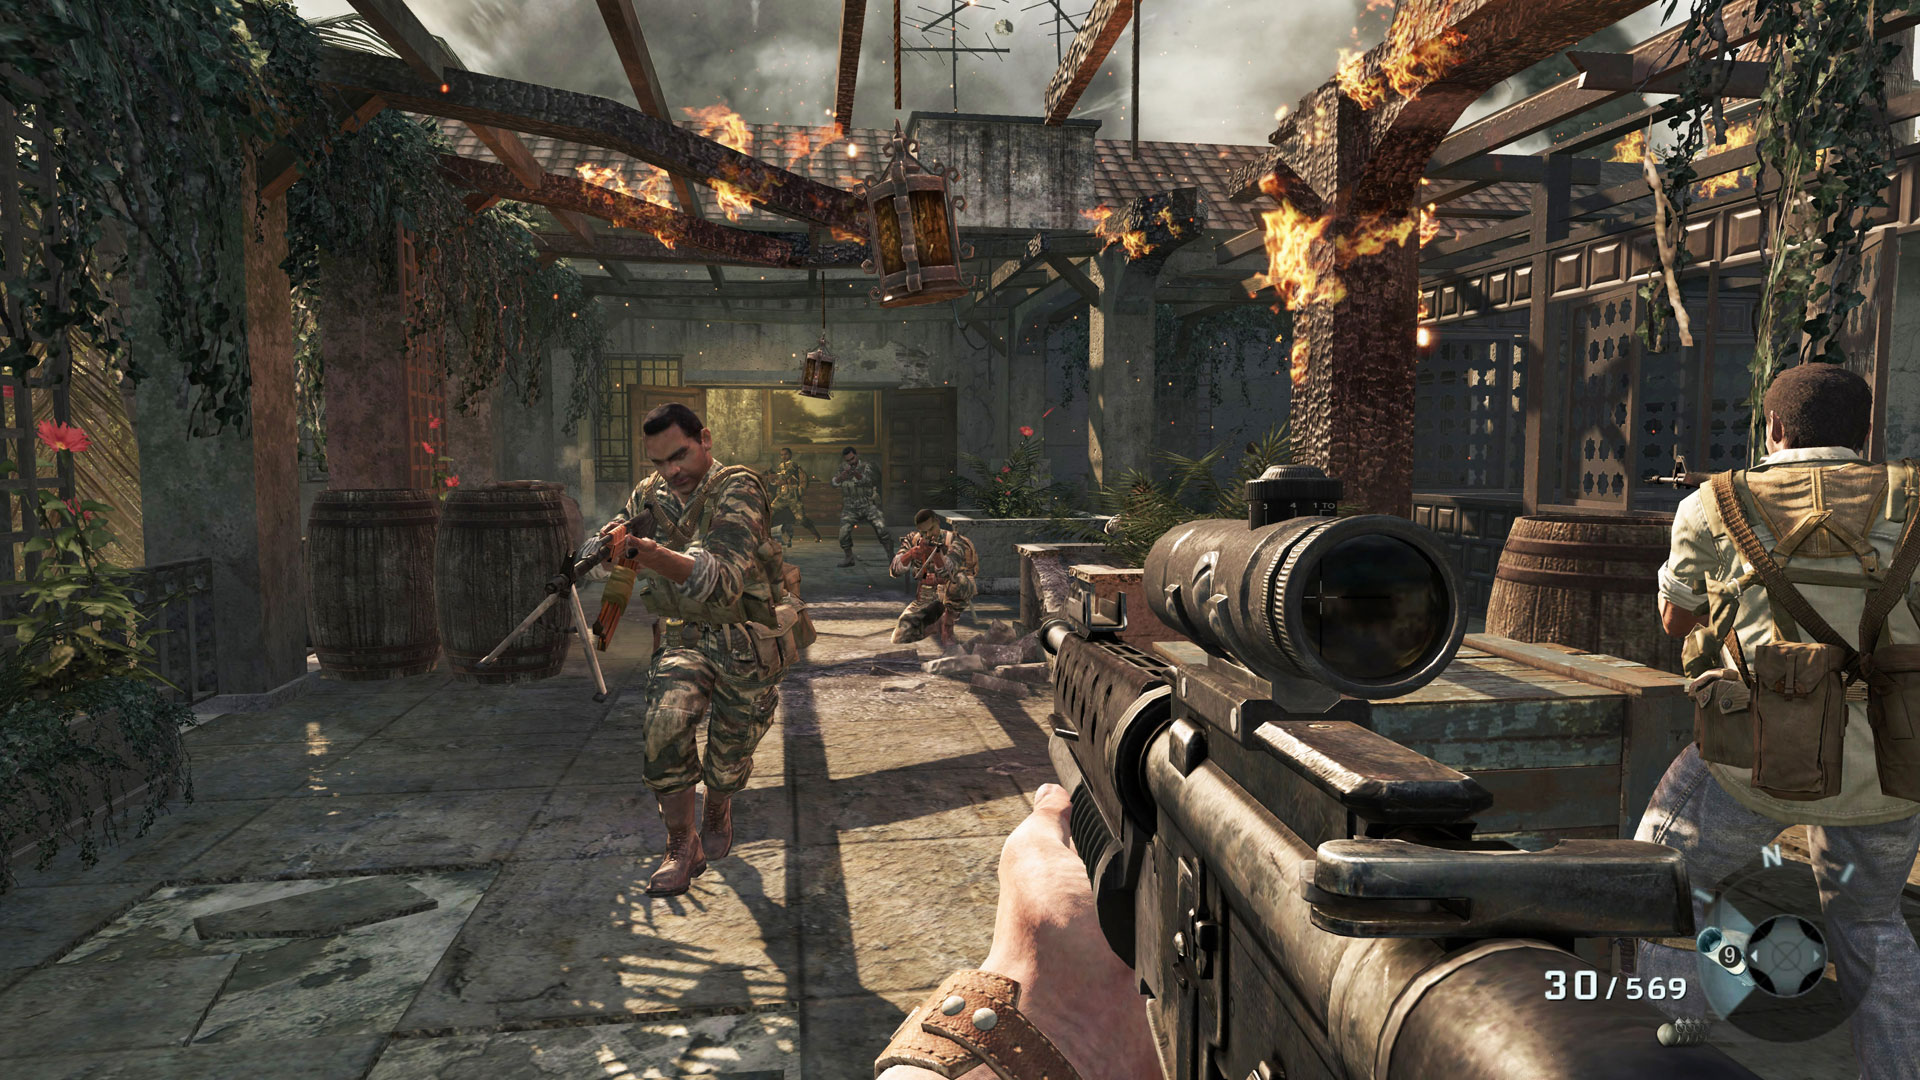 Free download call of duty pc game